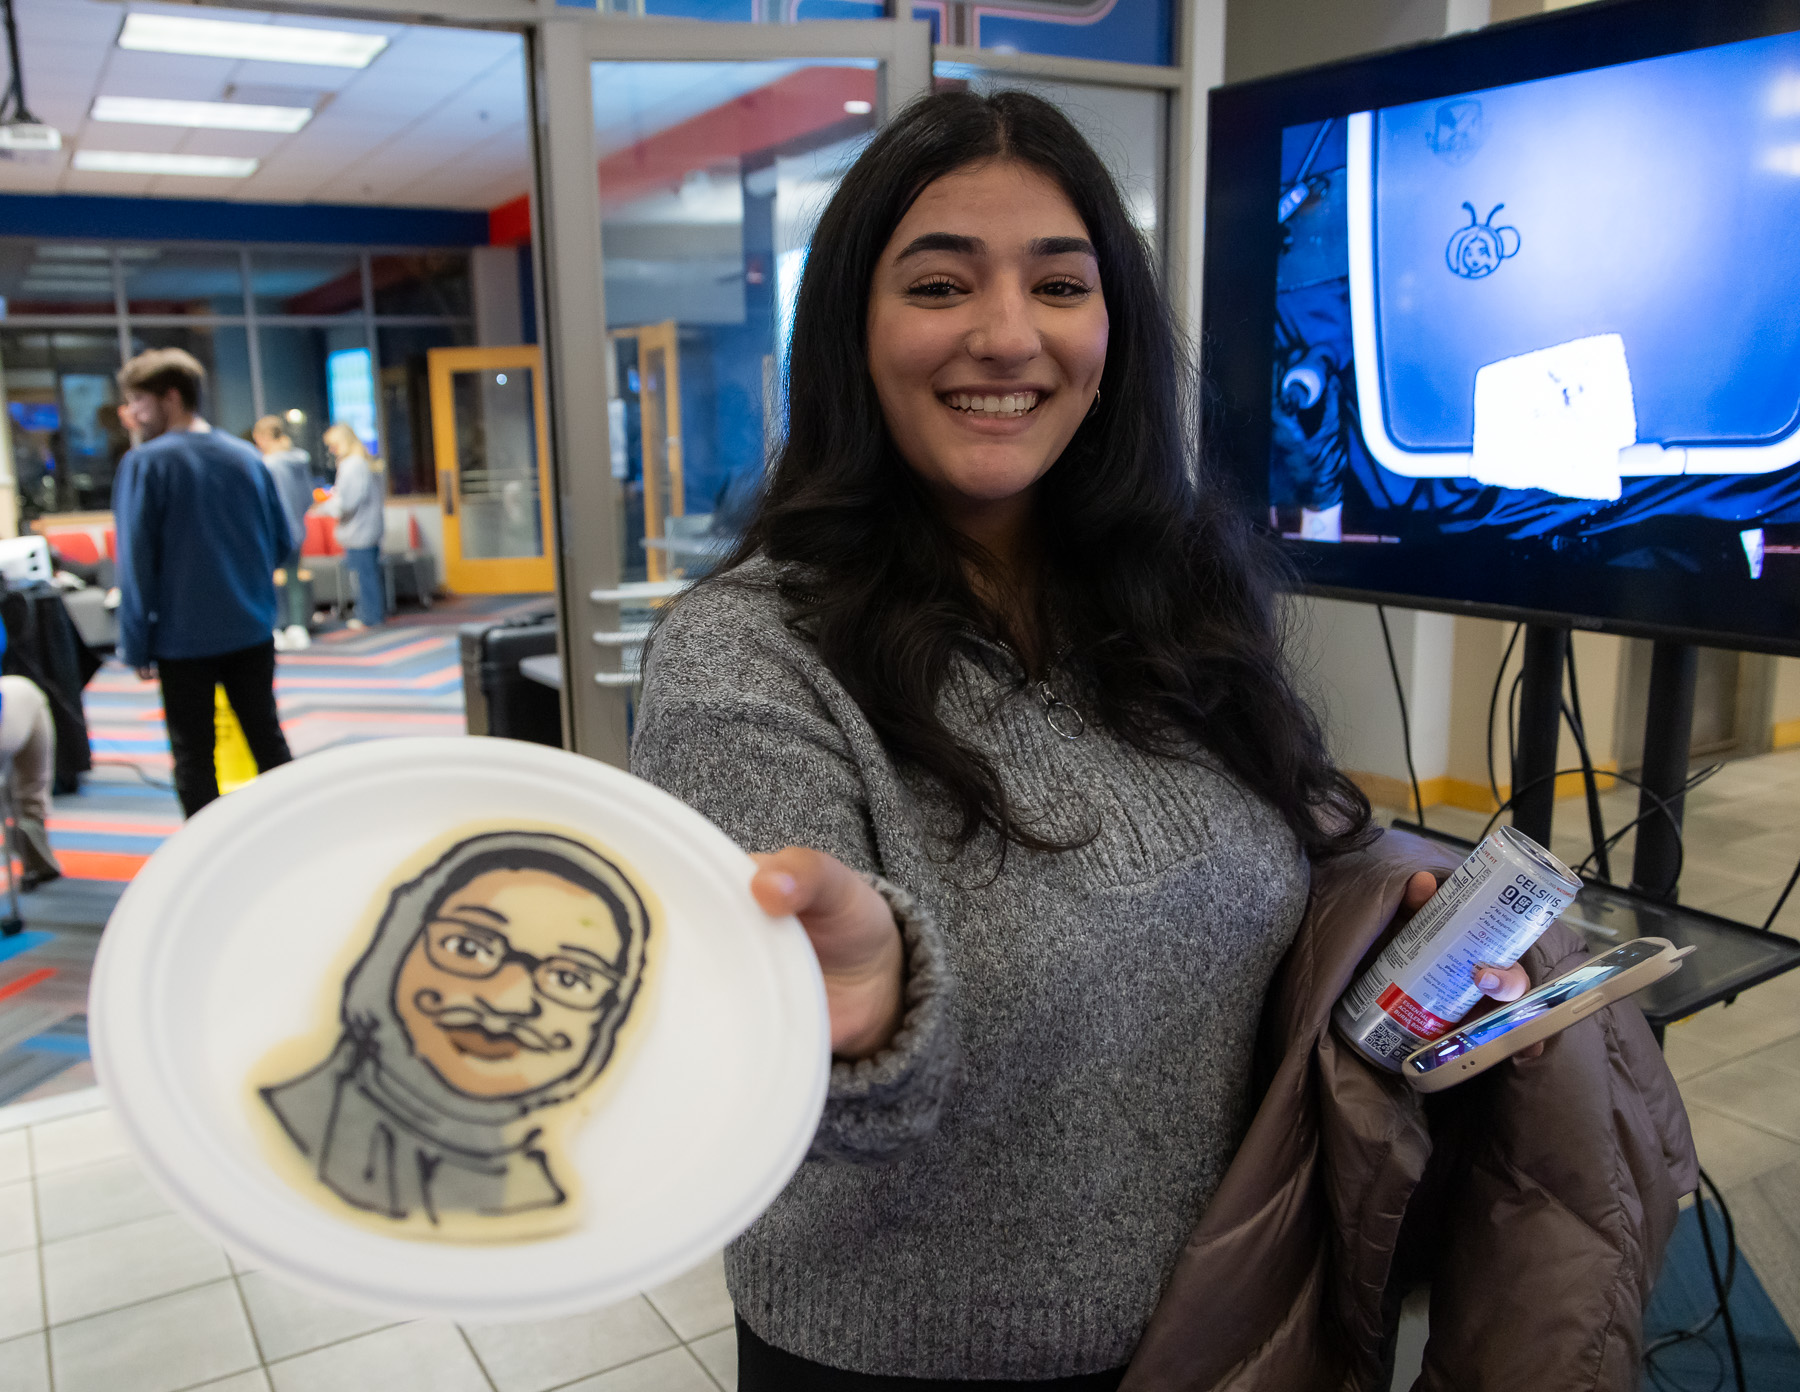 Students lined up to have custom bespoke pancakes made in any design they wanted. (Photo by Jeff Carrion / DePaul University) 